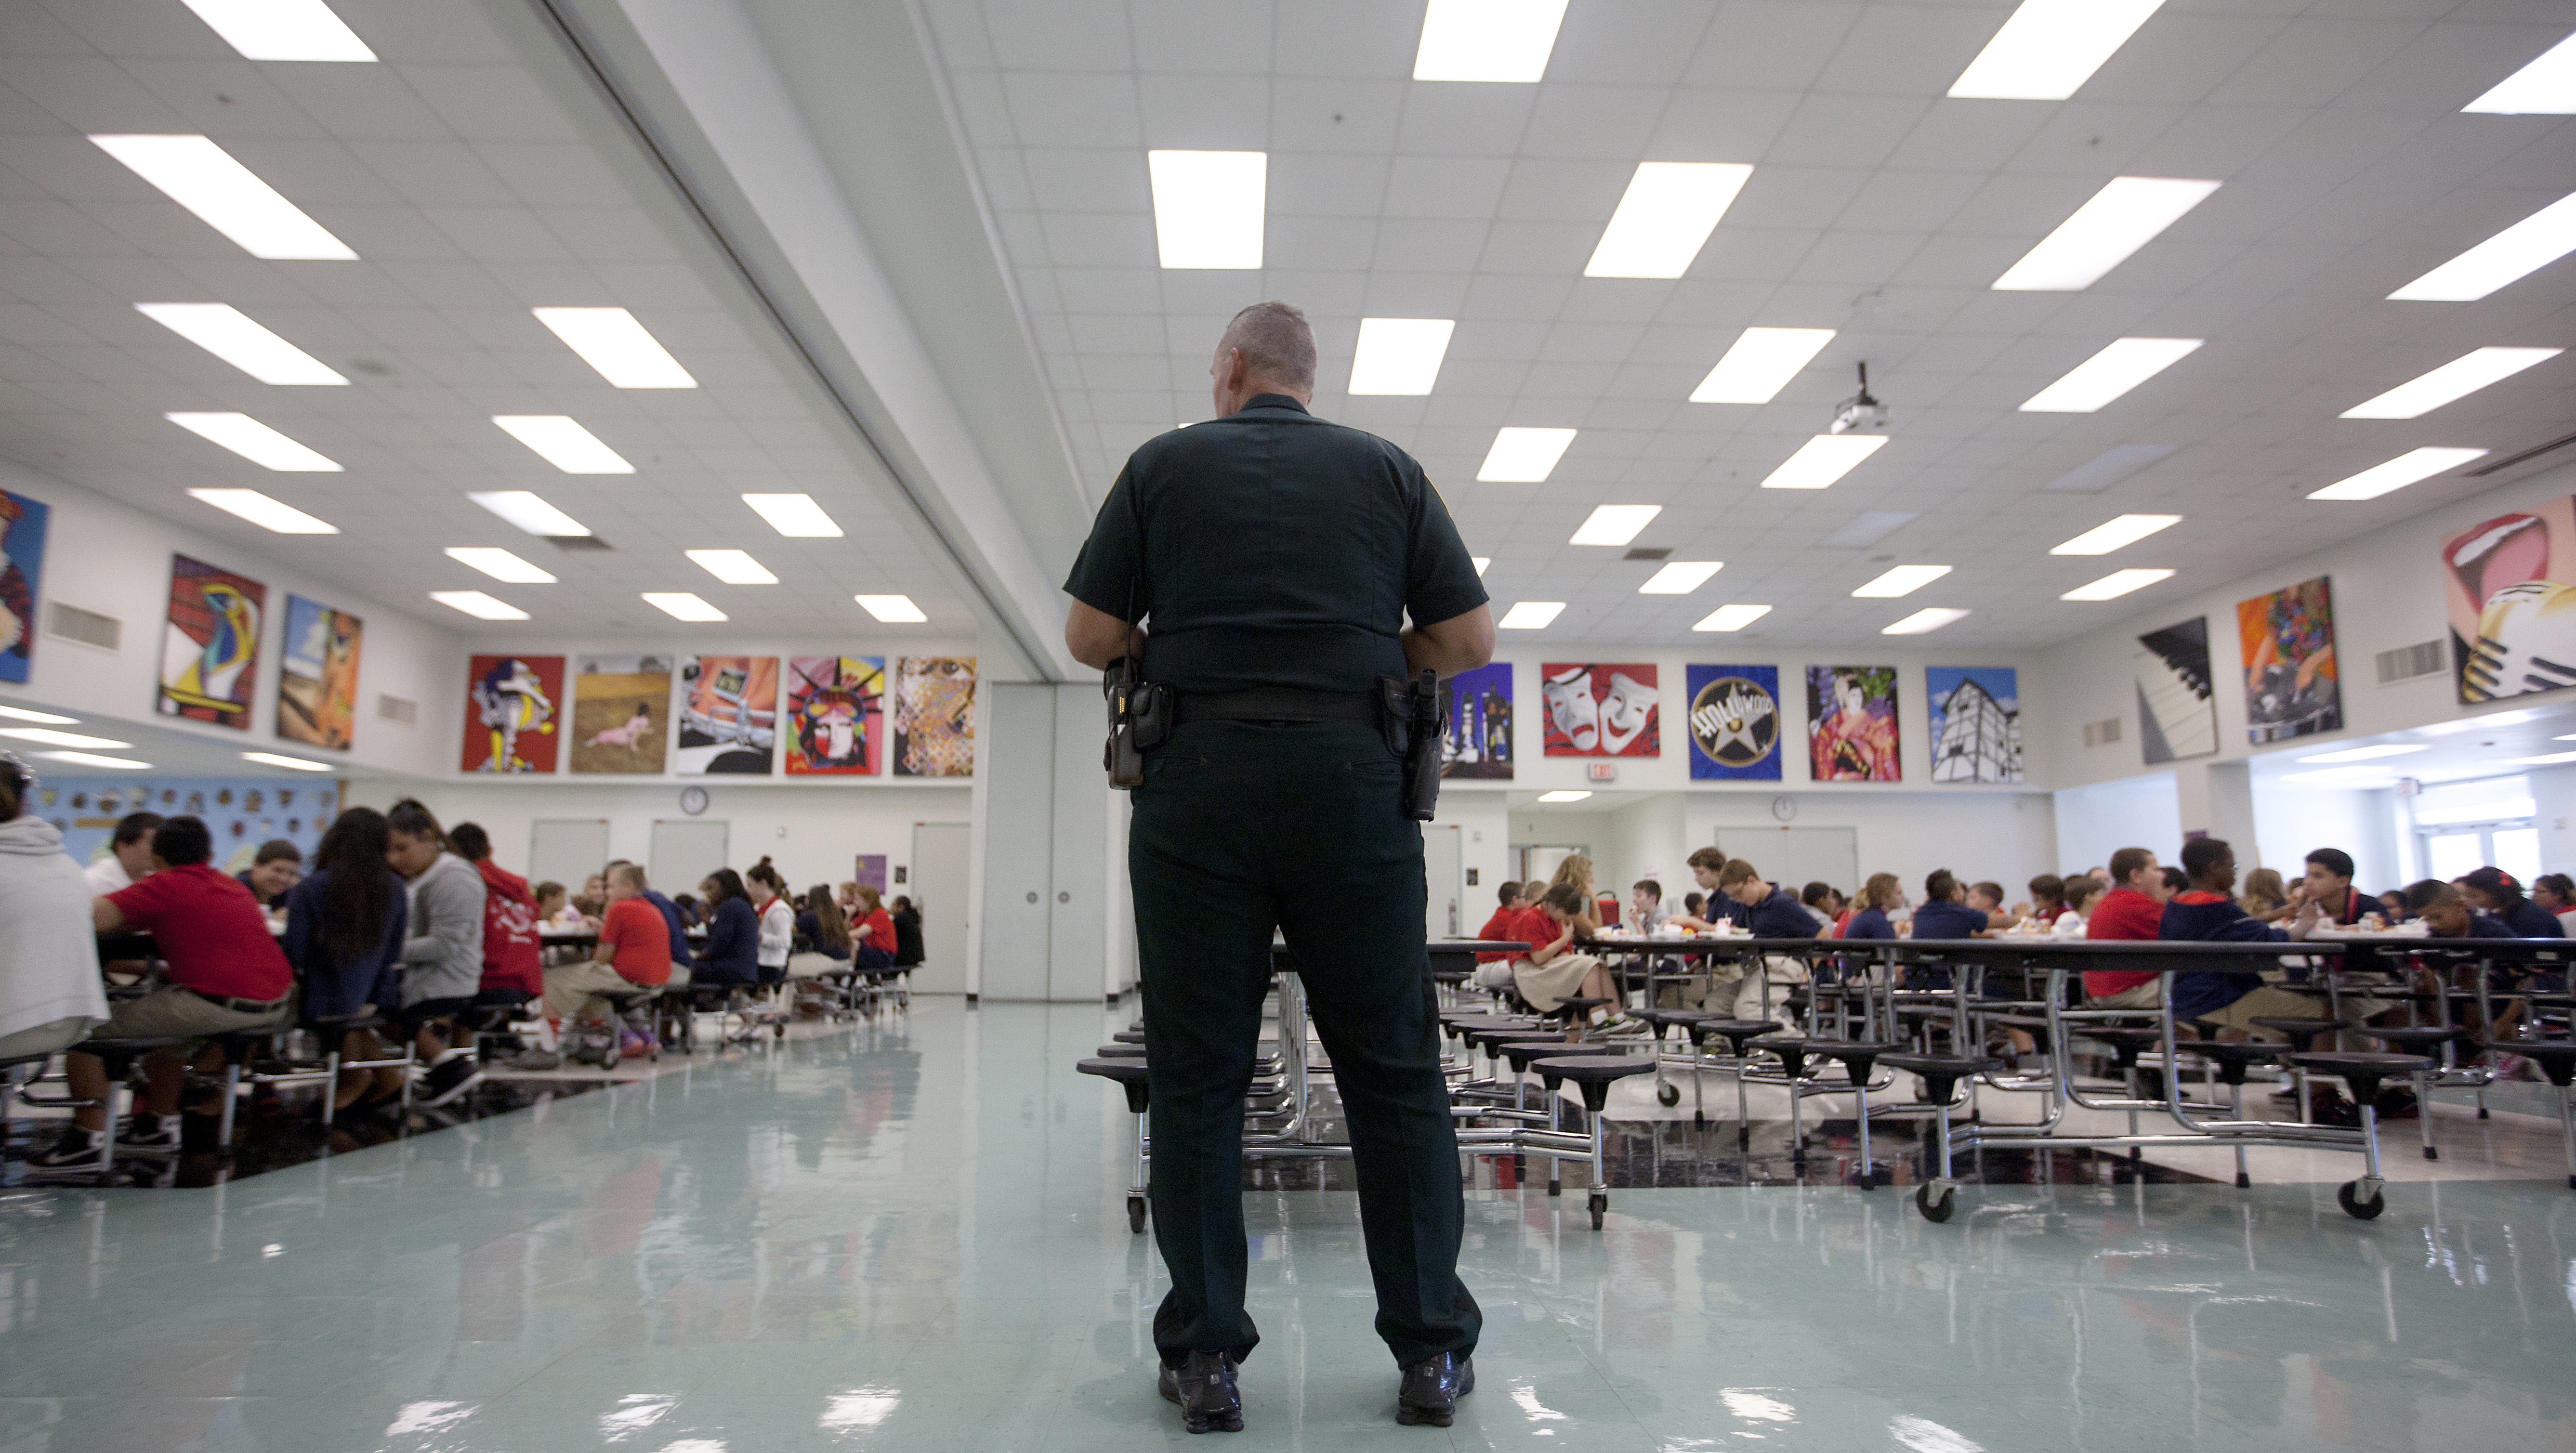 Lee County school board plans to spend $57M on safety if voters OK tax